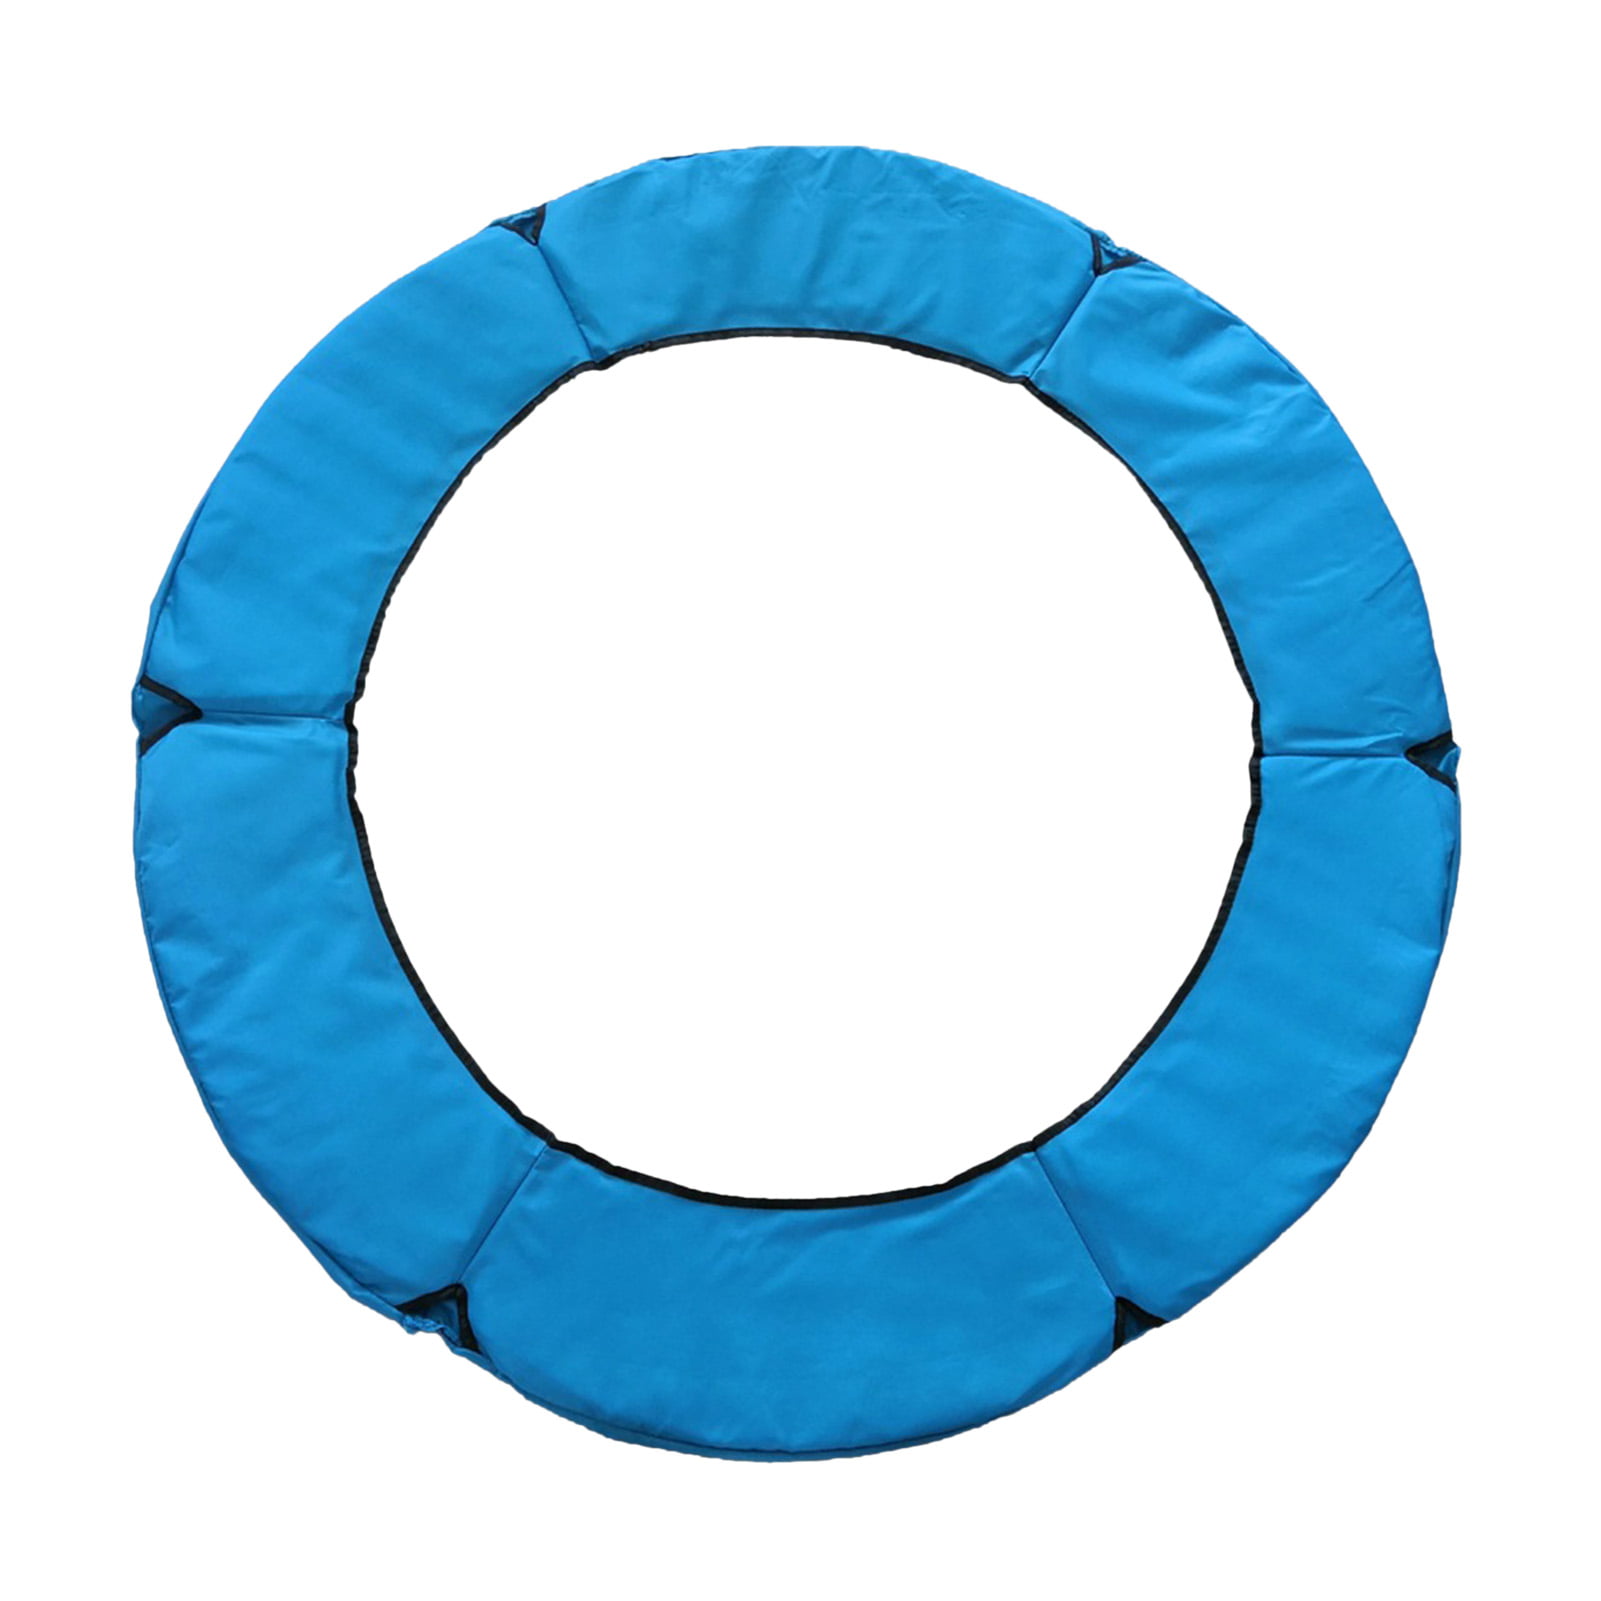 MEGAWHEELS Trampoline Safety Replacement Pad UV-Resistant Spring Cover